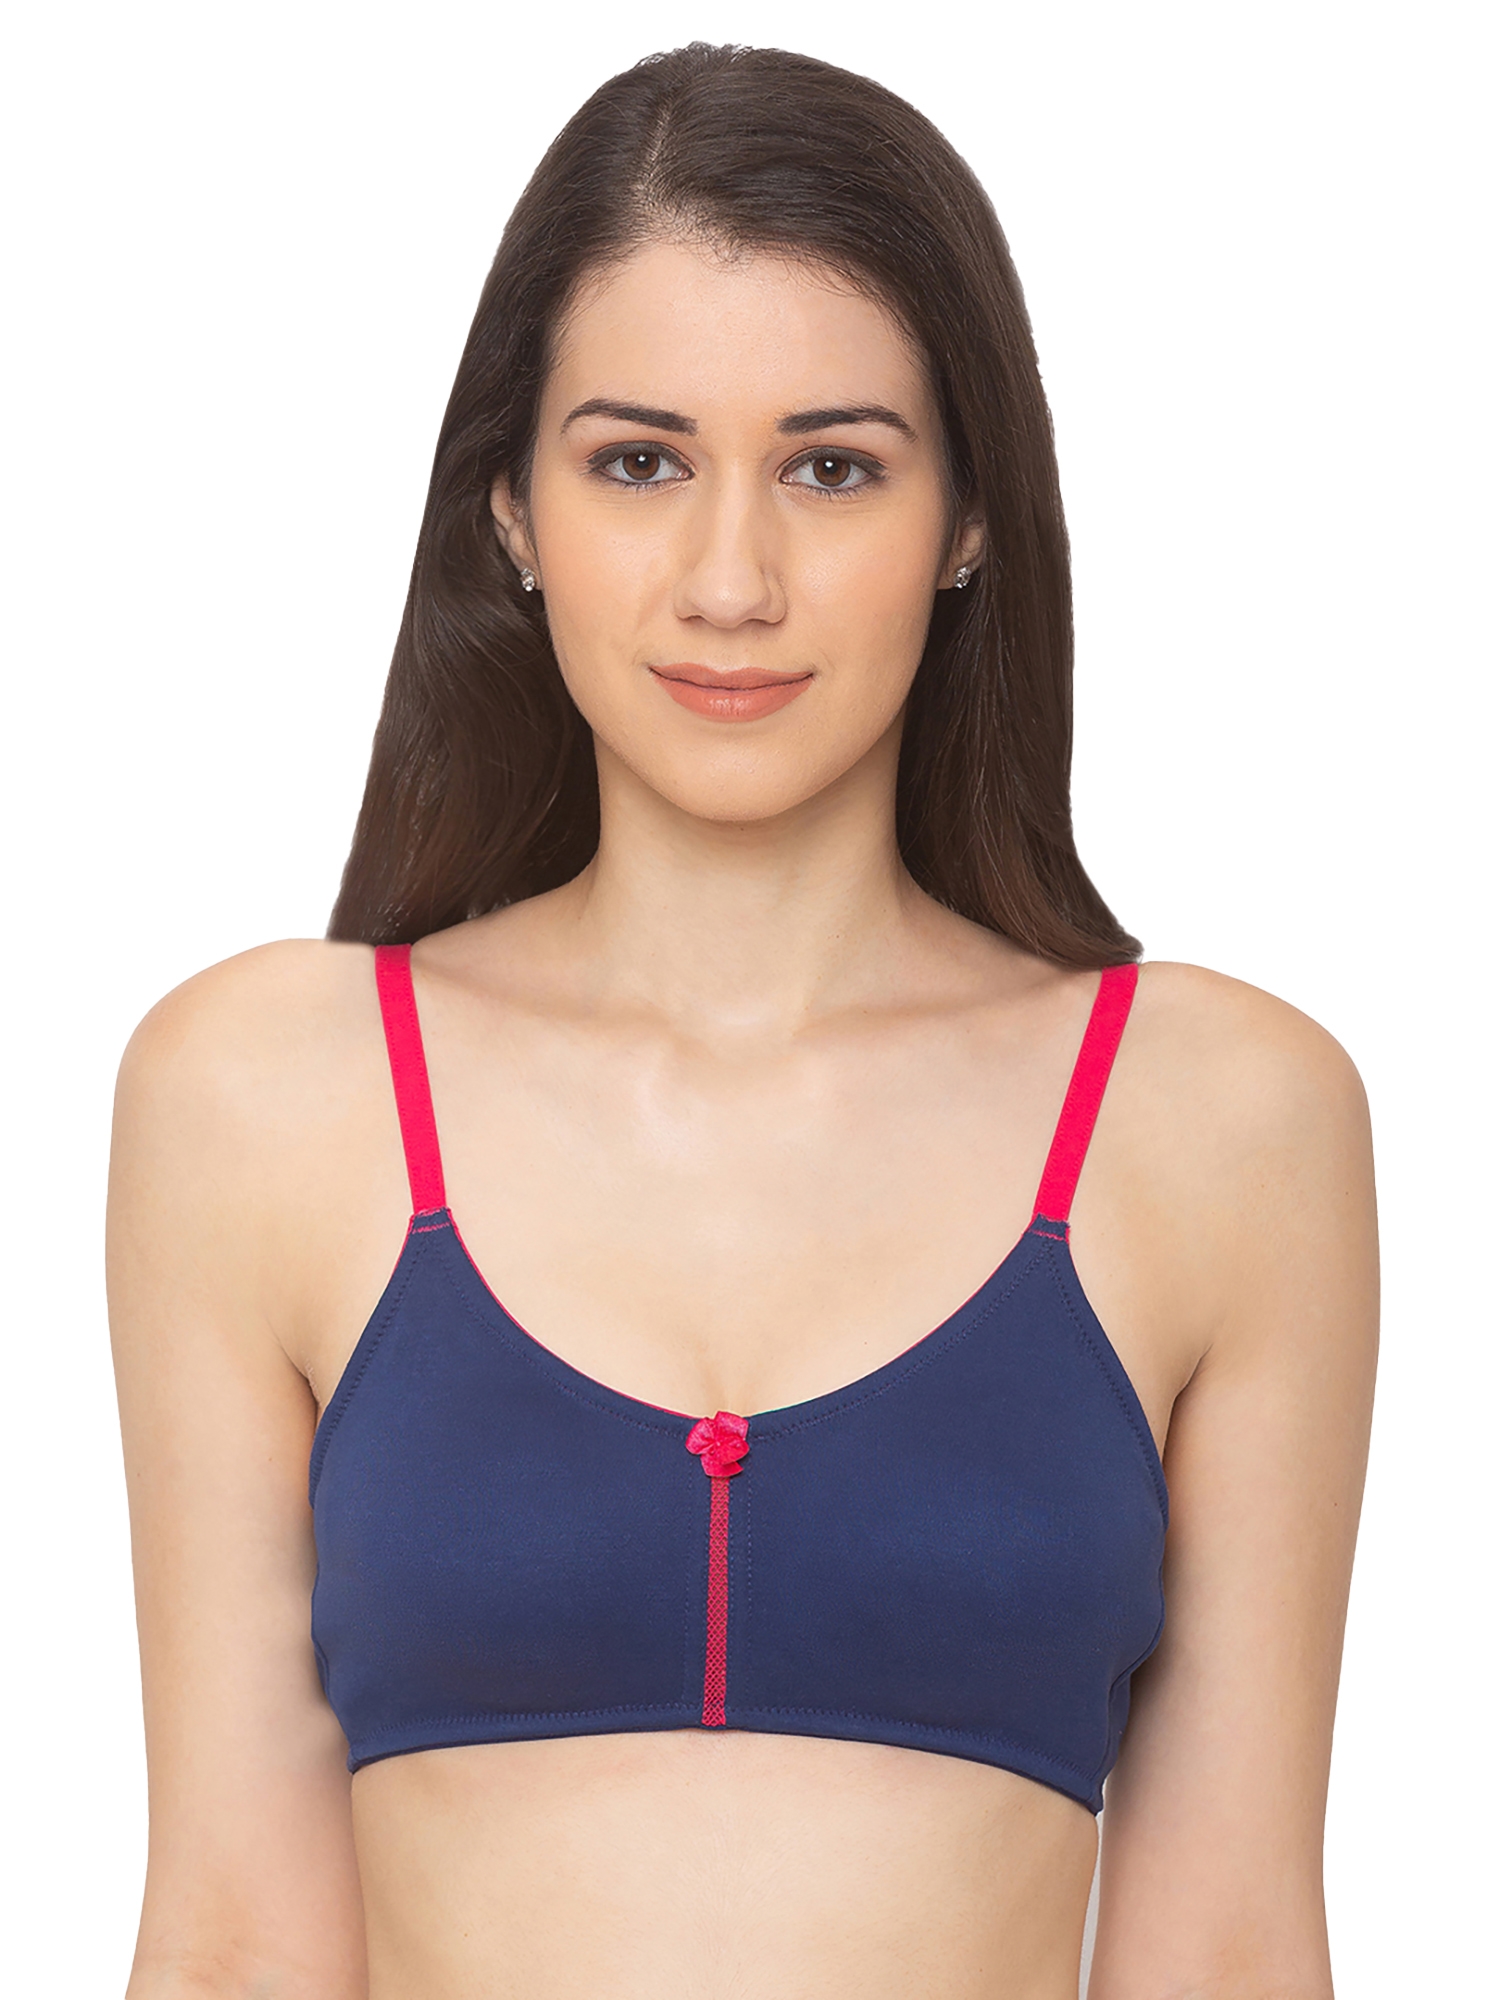 CANDYSKIN | Candyskin Women's DarkBlue Full Support Cotton Non-Padded Wirefree Full Coverage